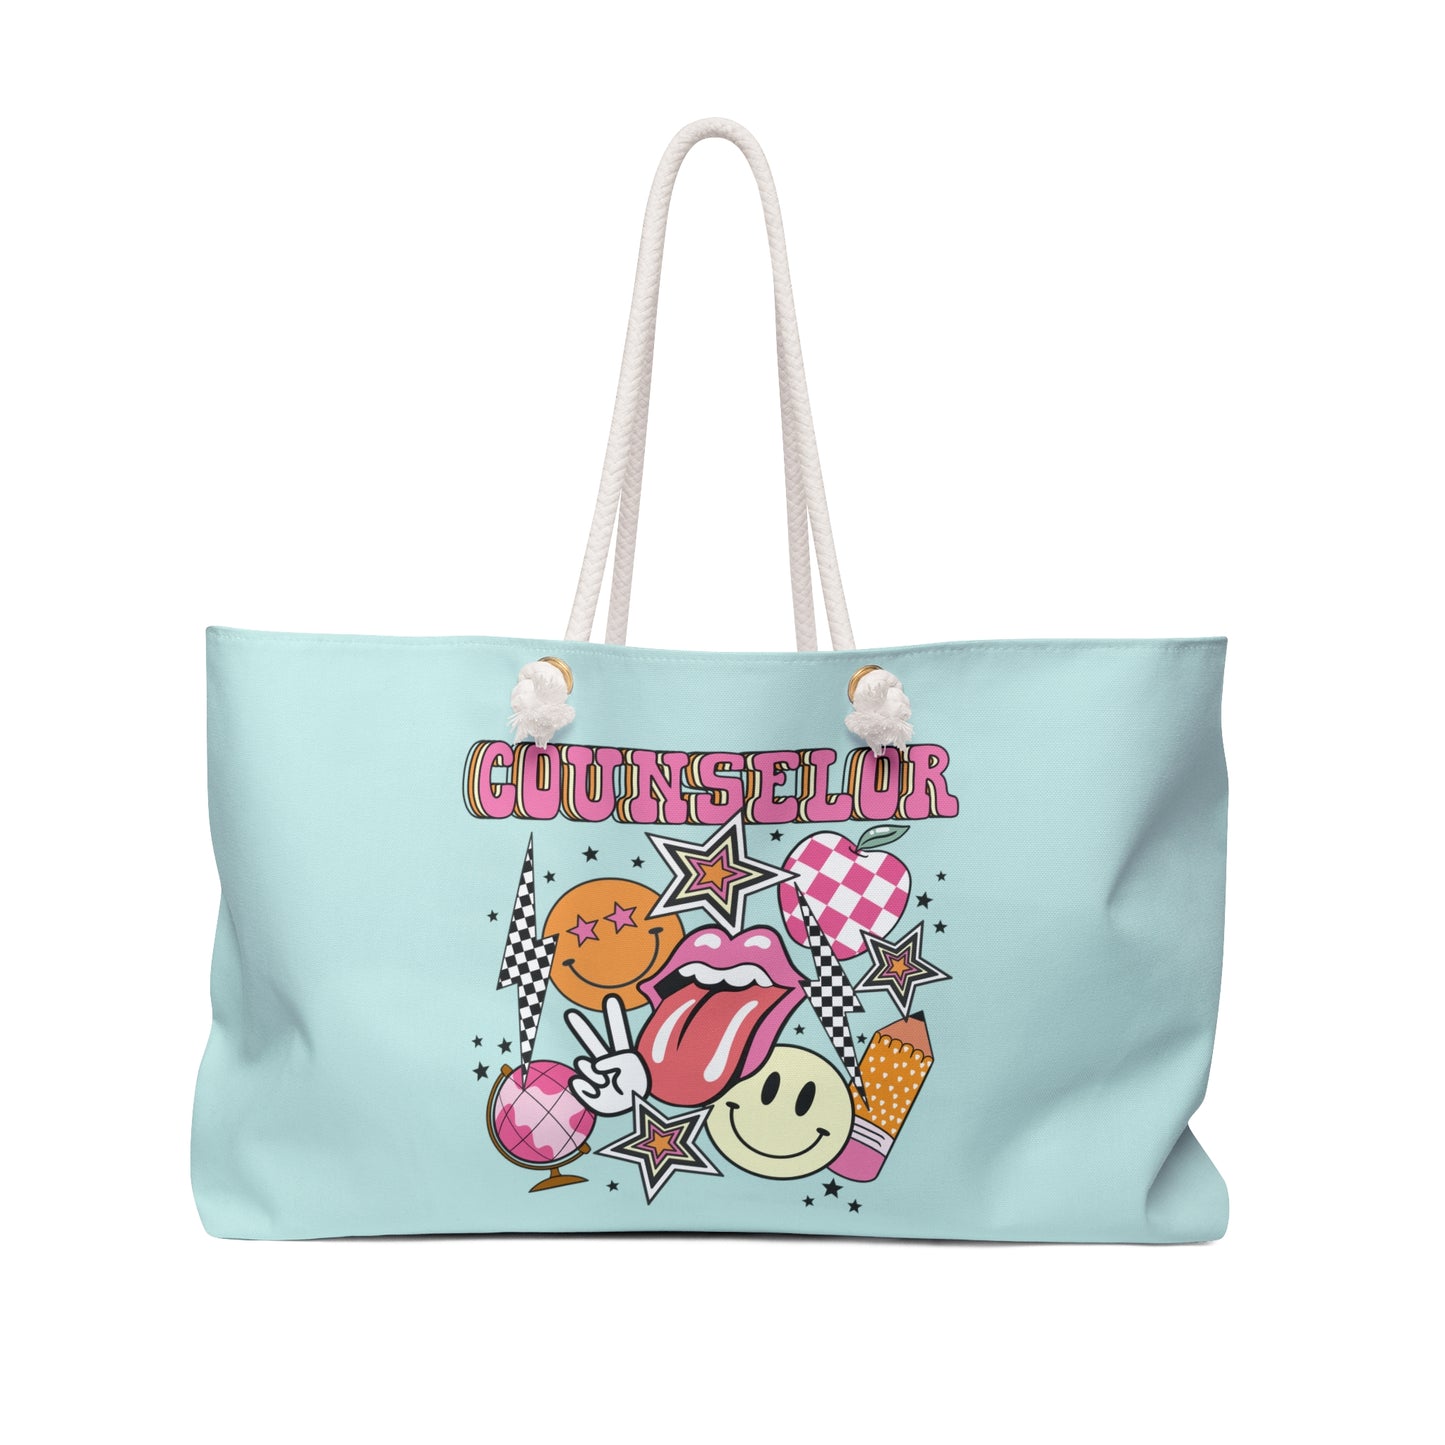 Retro Counselor Oversized Therapy Tote